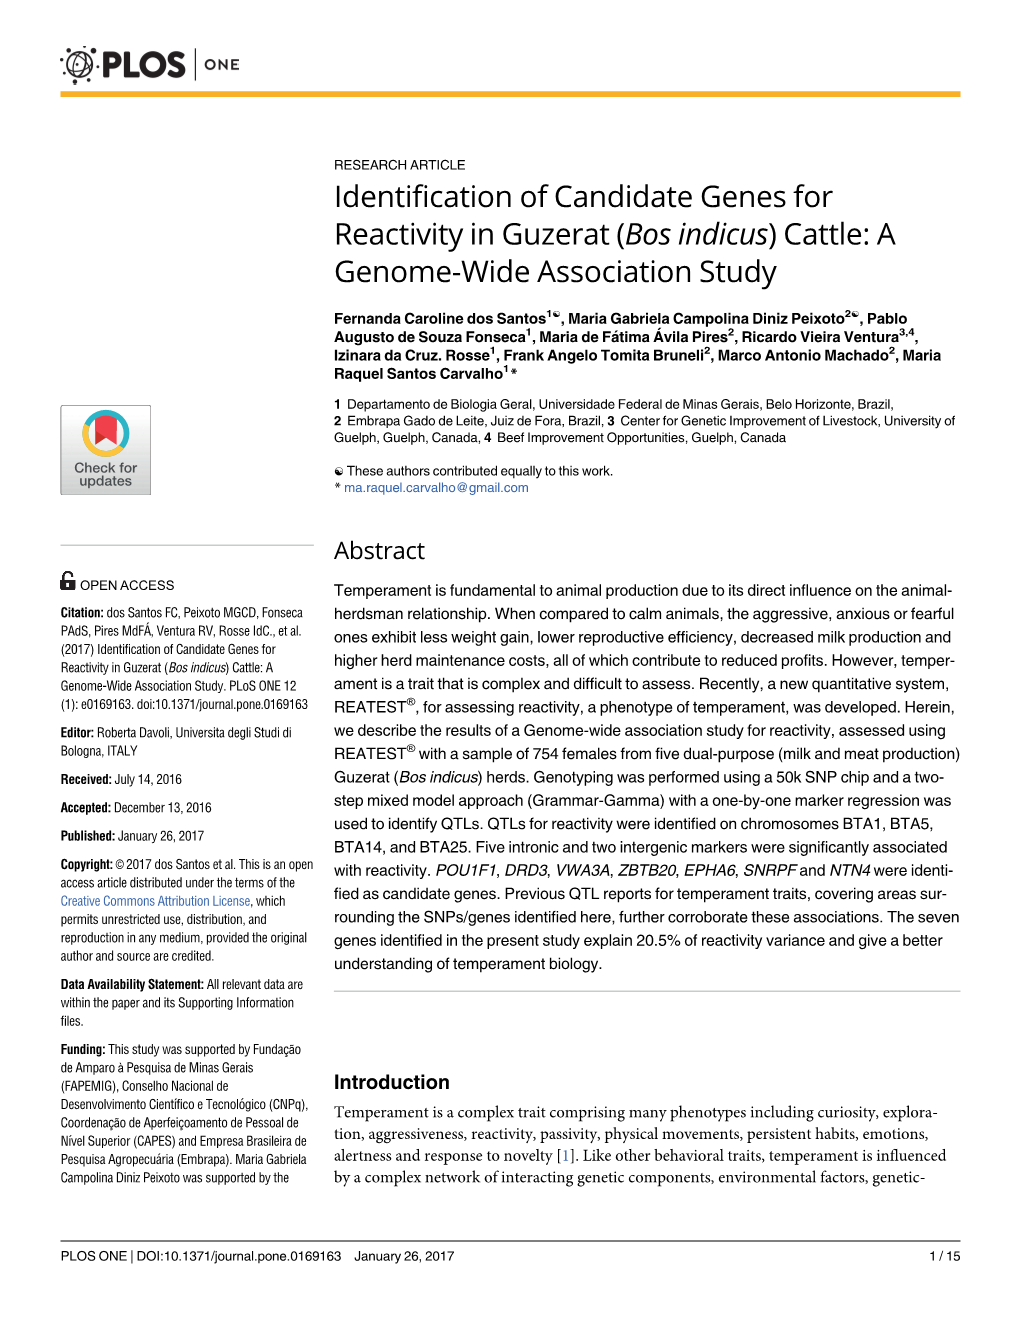 Identification of Candidate Genes for Reactivity in Guzerat (Bos Indicus) Cattle: a Genome-Wide Association Study